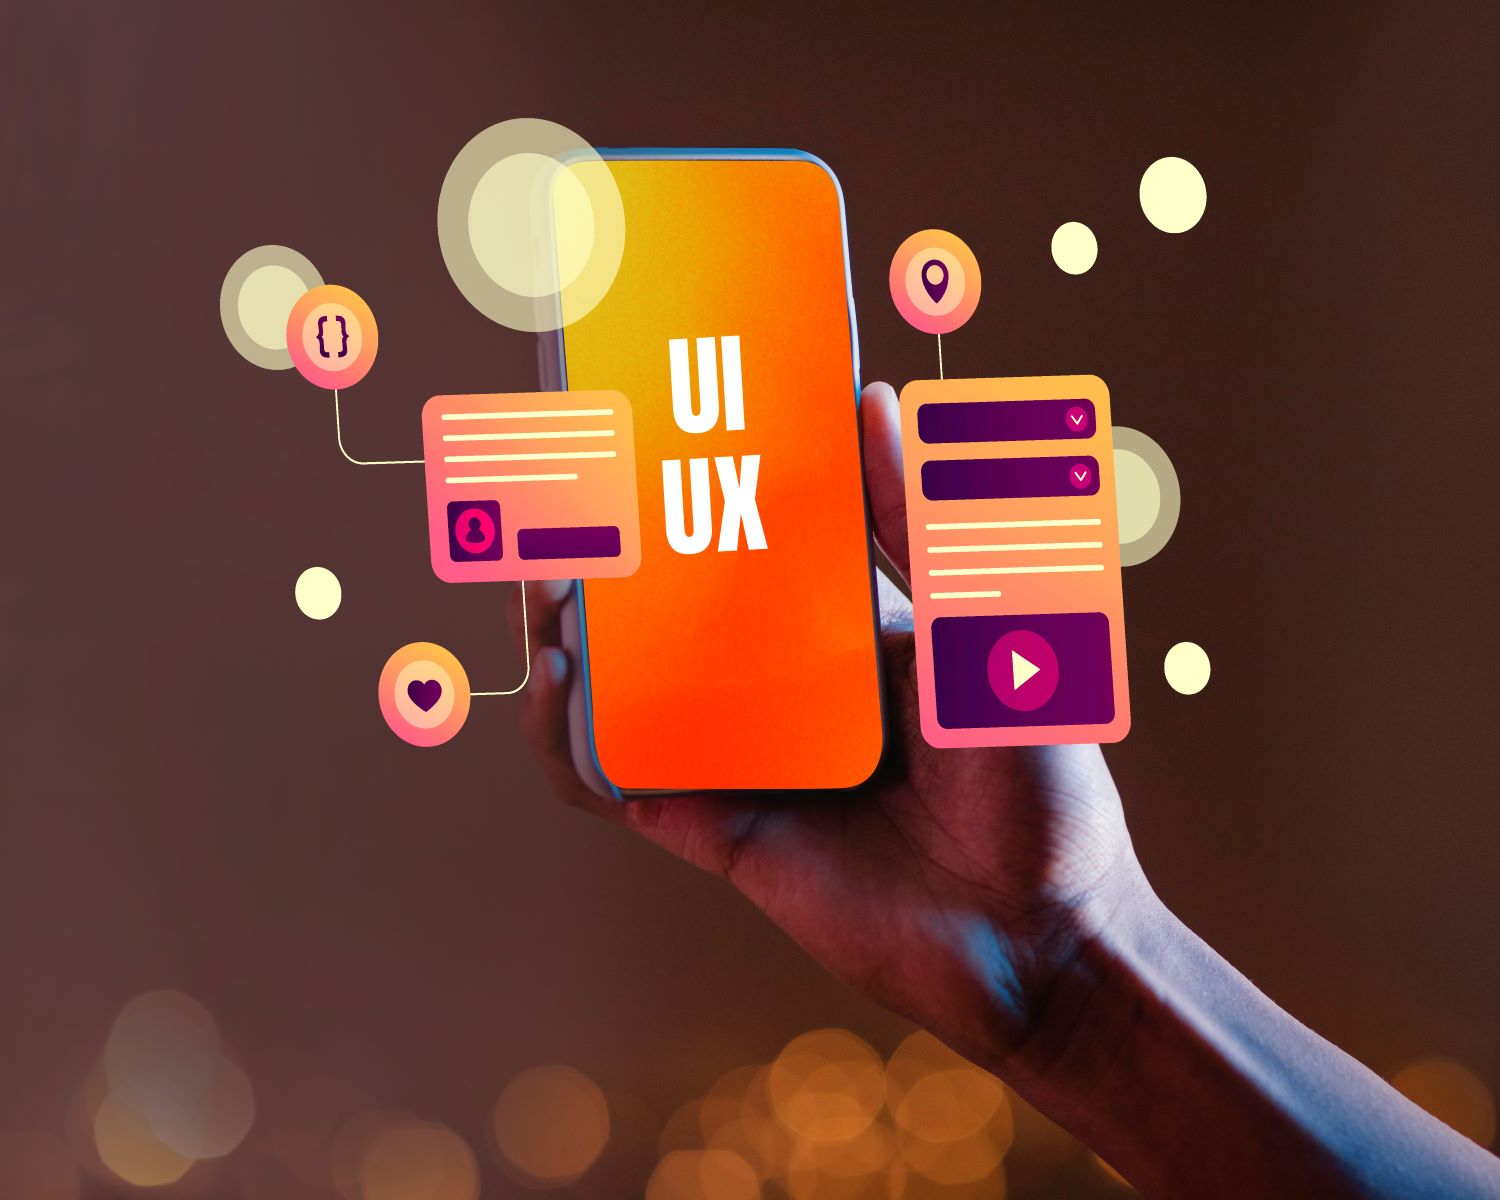 What the future will bring IT sectors in terms of UI/UX development service?